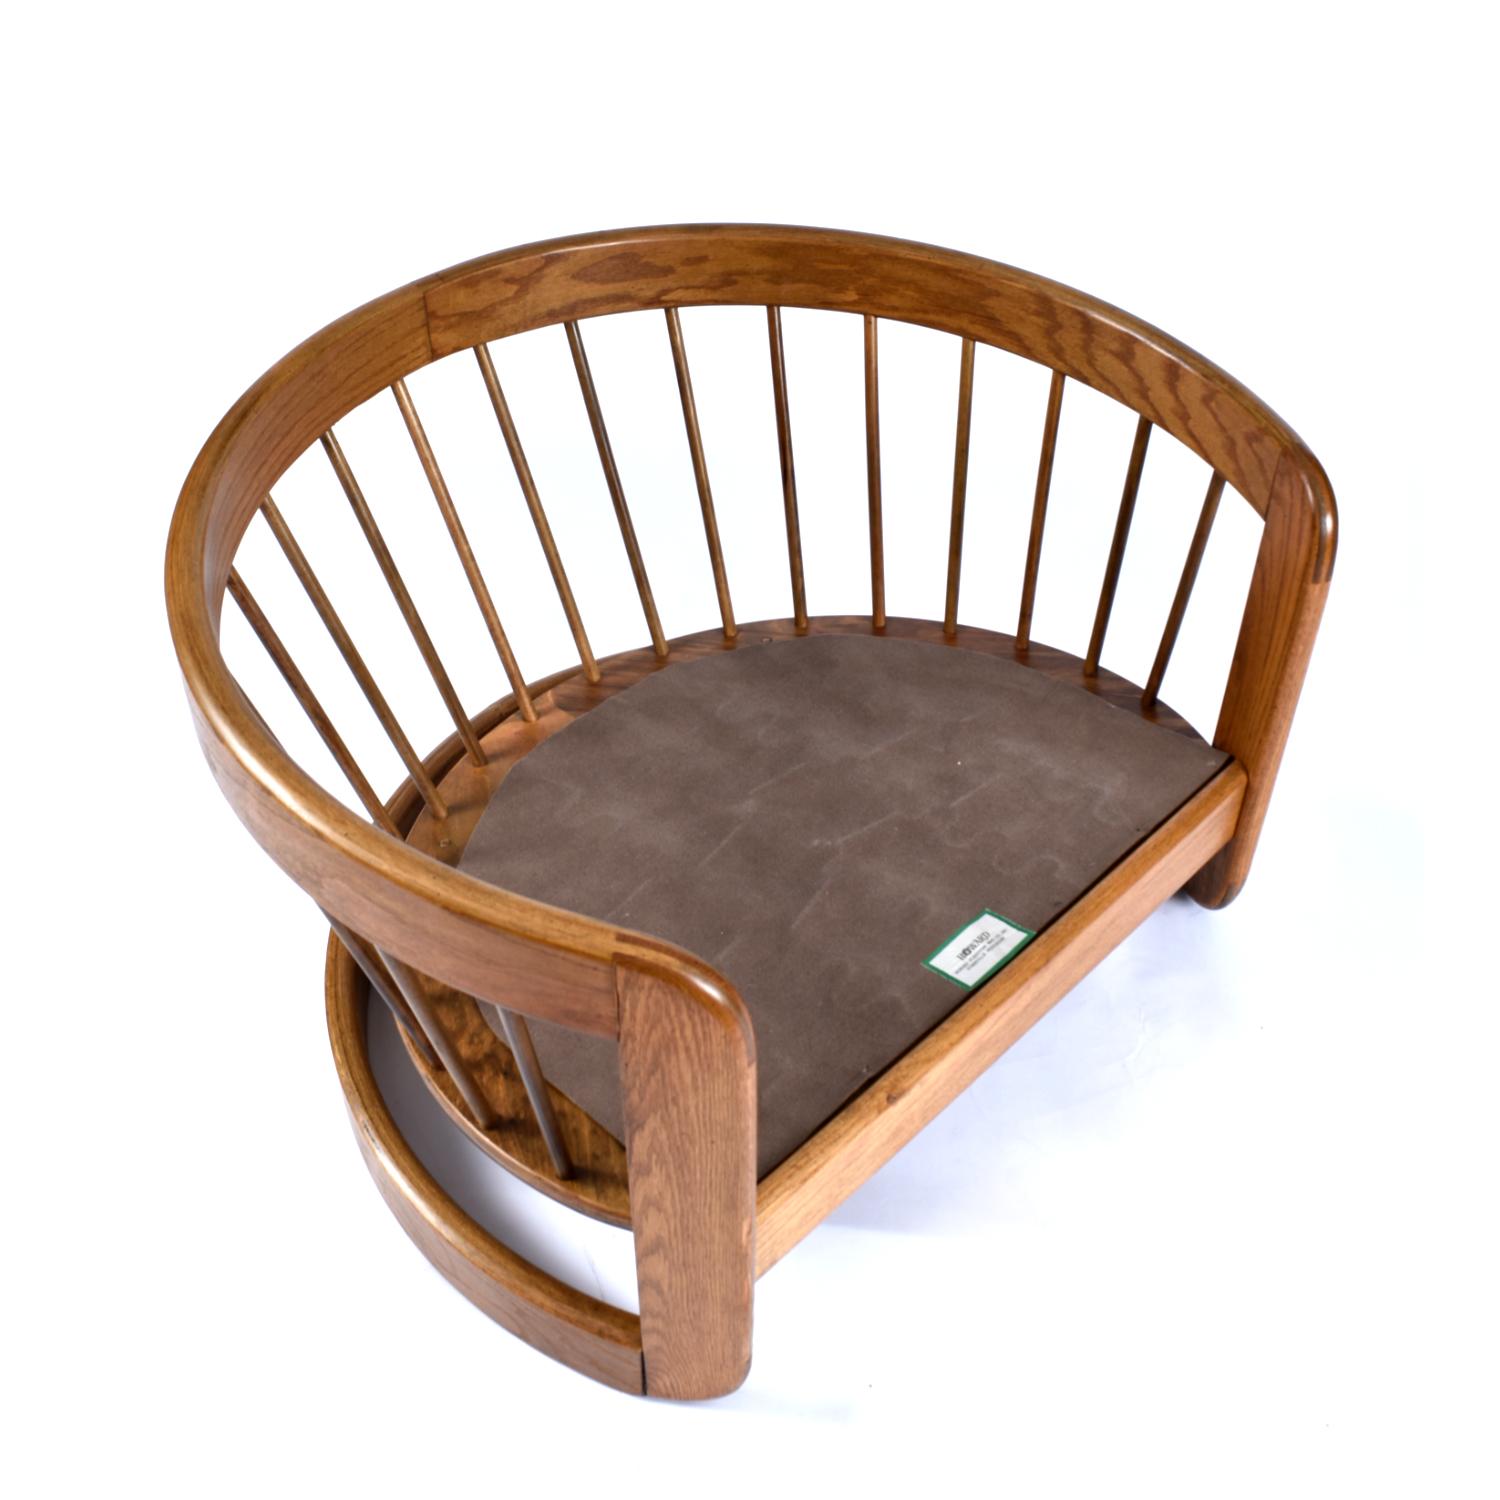 CUSTOM ORDER:  (2) Chairs and (2) Ottomans

Comfort is king with this stylish vintage 1980s barrel chair by Howard Furniture. American made, solid oak throughout! The wide and deep chair give the occupant plenty of room to get cozy. The